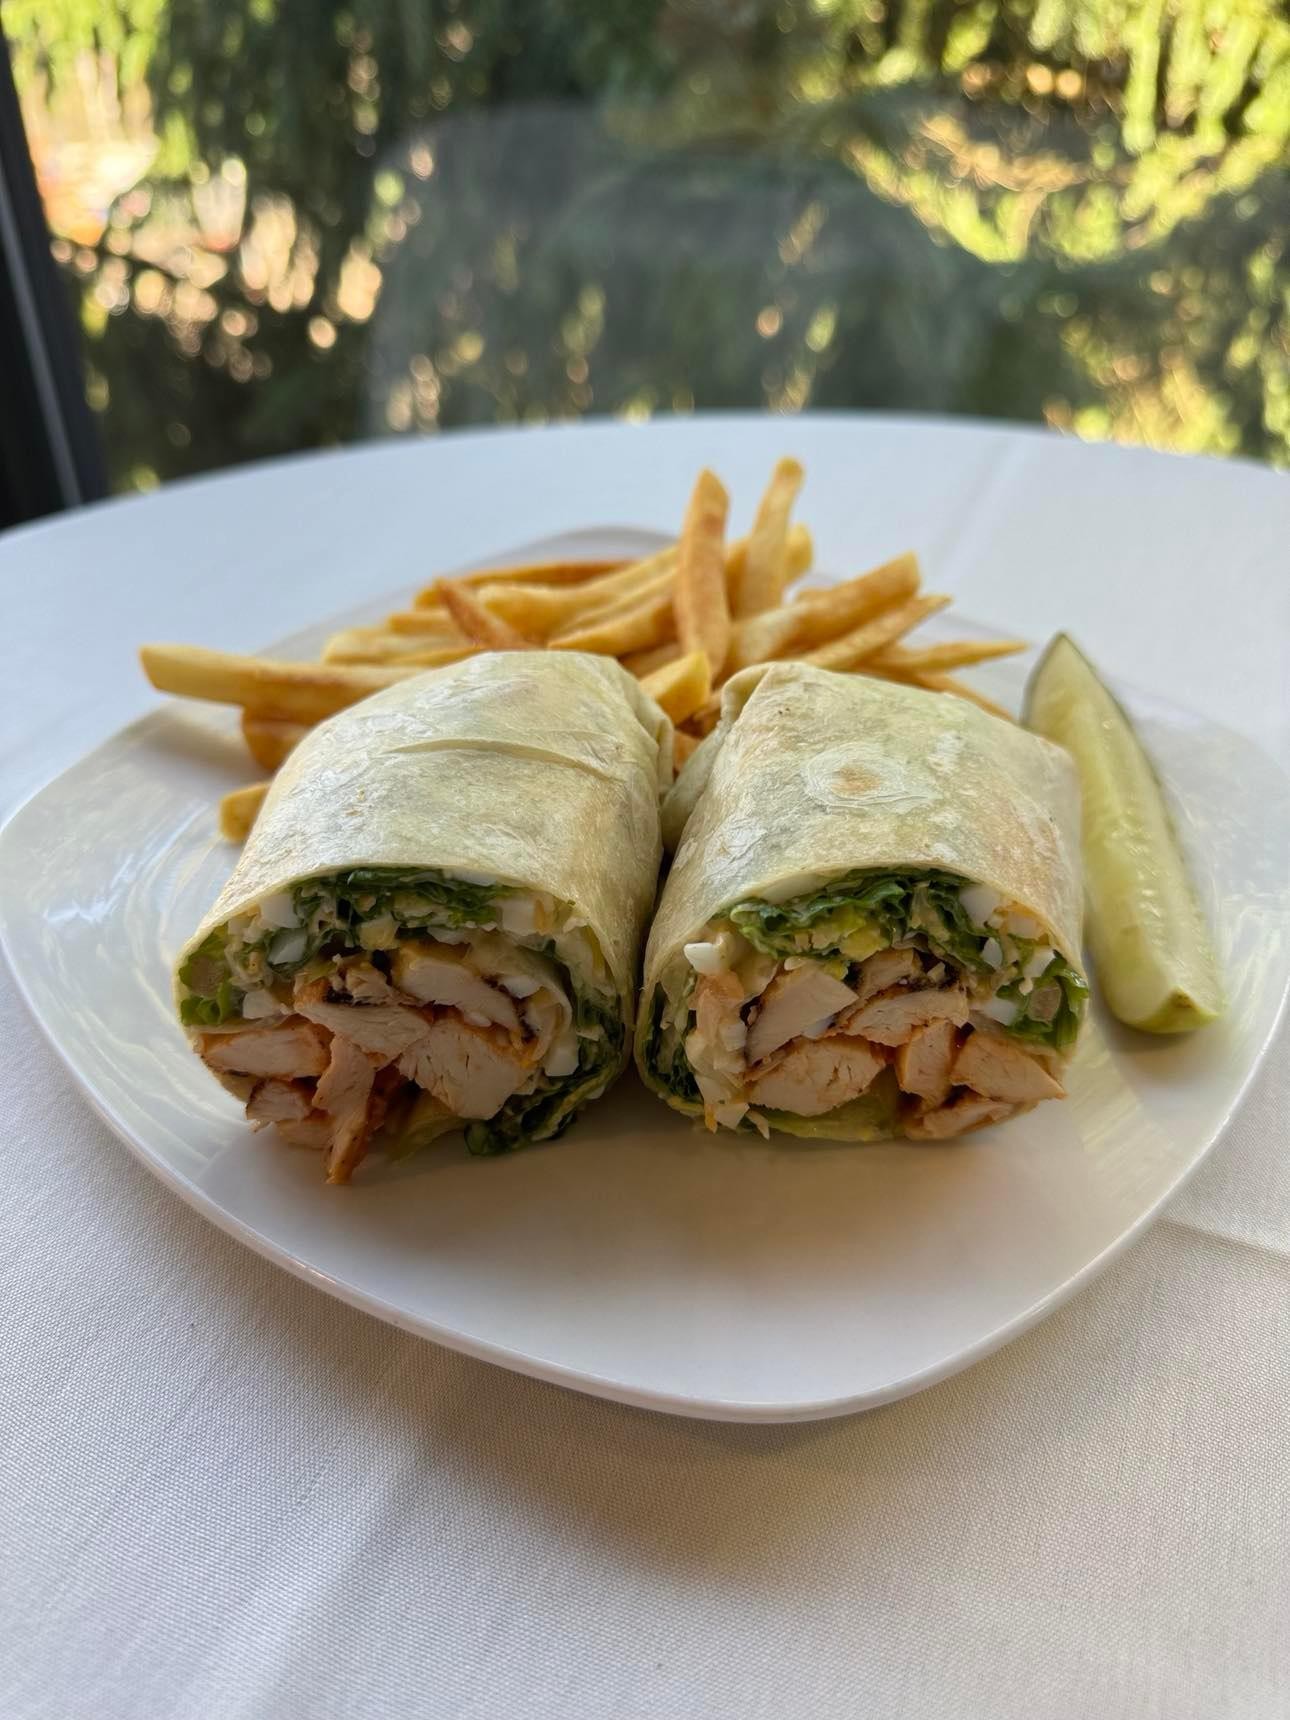 Buffalo Chicken Wrap and French Fries